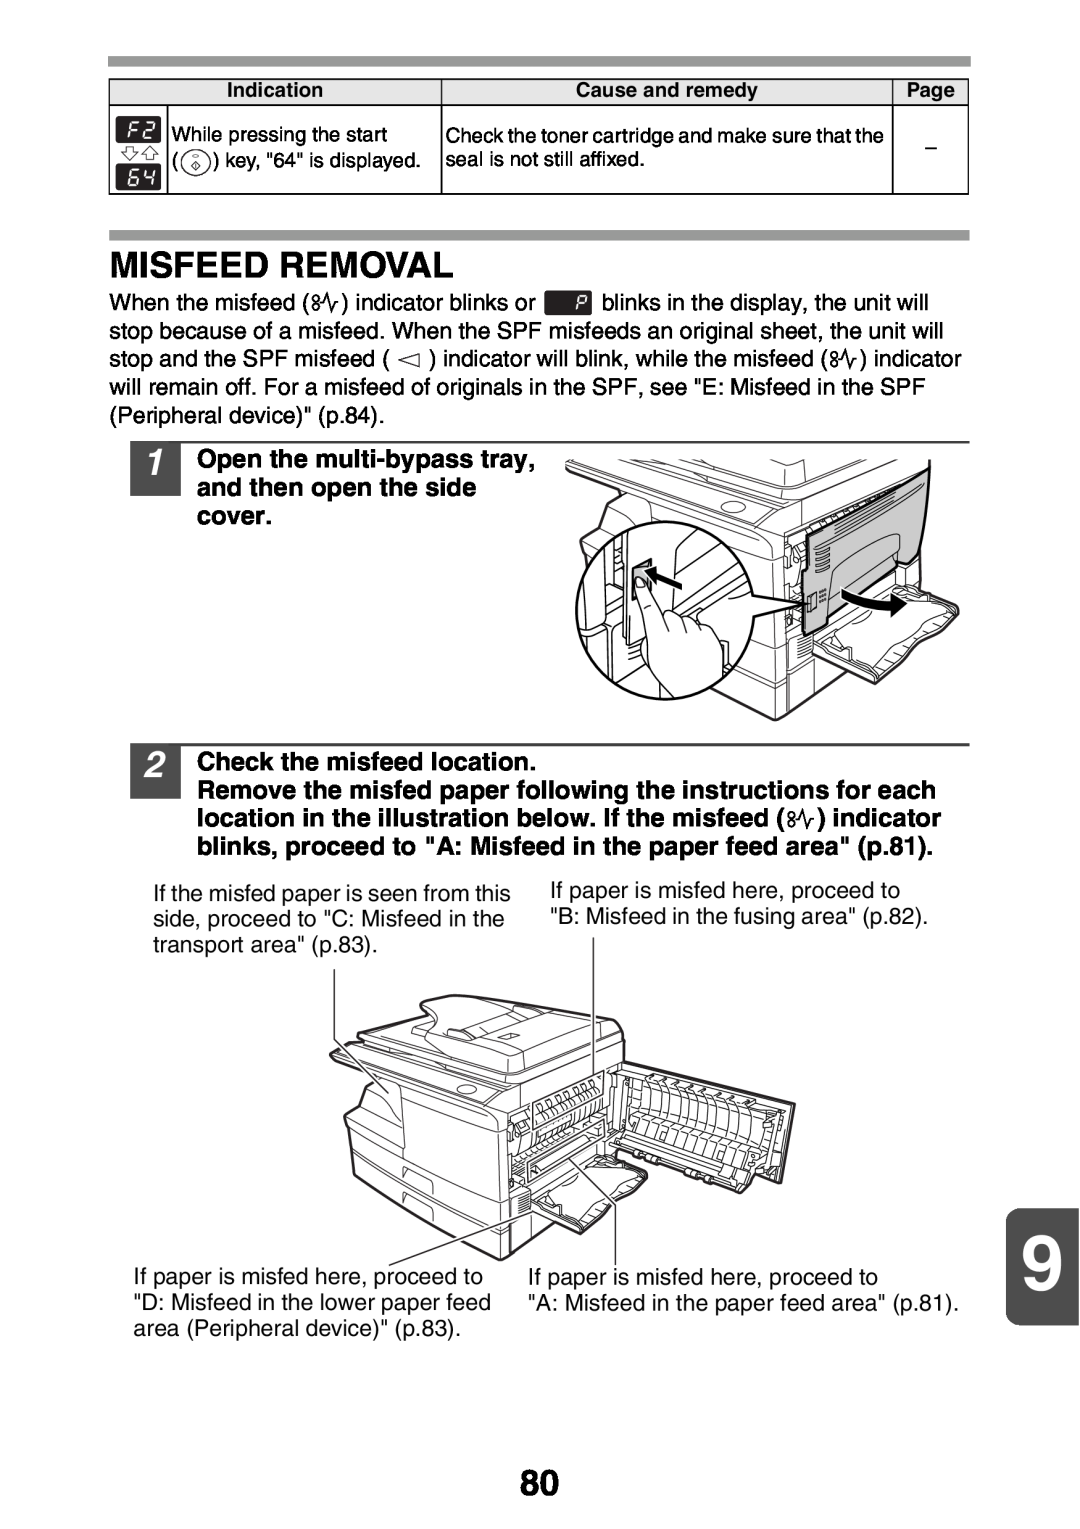 Sharp MX-B200 manual Misfeed Removal, Open the multi-bypass tray, and then open the side cover, Check the misfeed location 